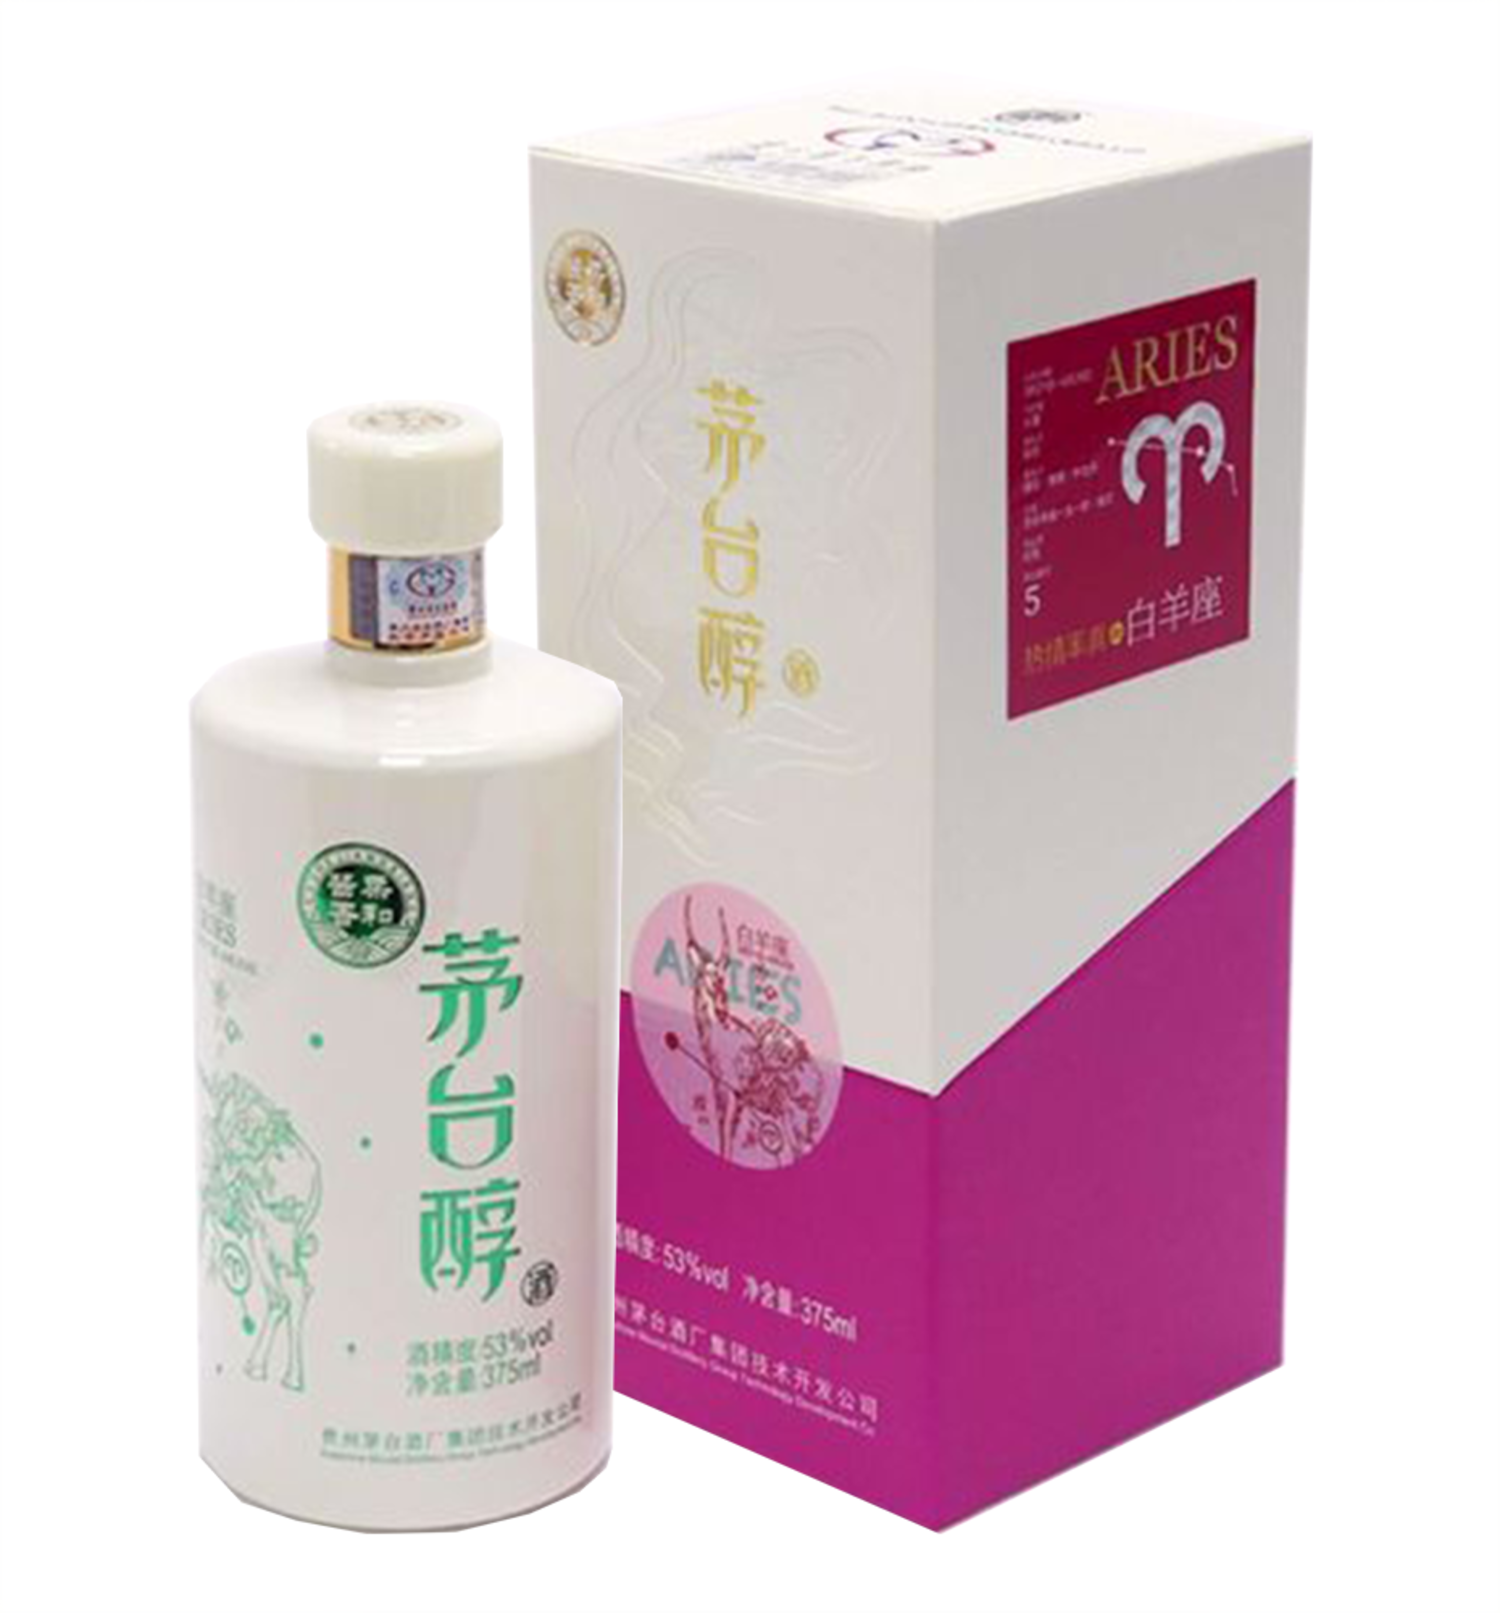 Moutai Chun Aries 茅台醇白羊座375ml $64 FREE DELIVERY - Uncle 